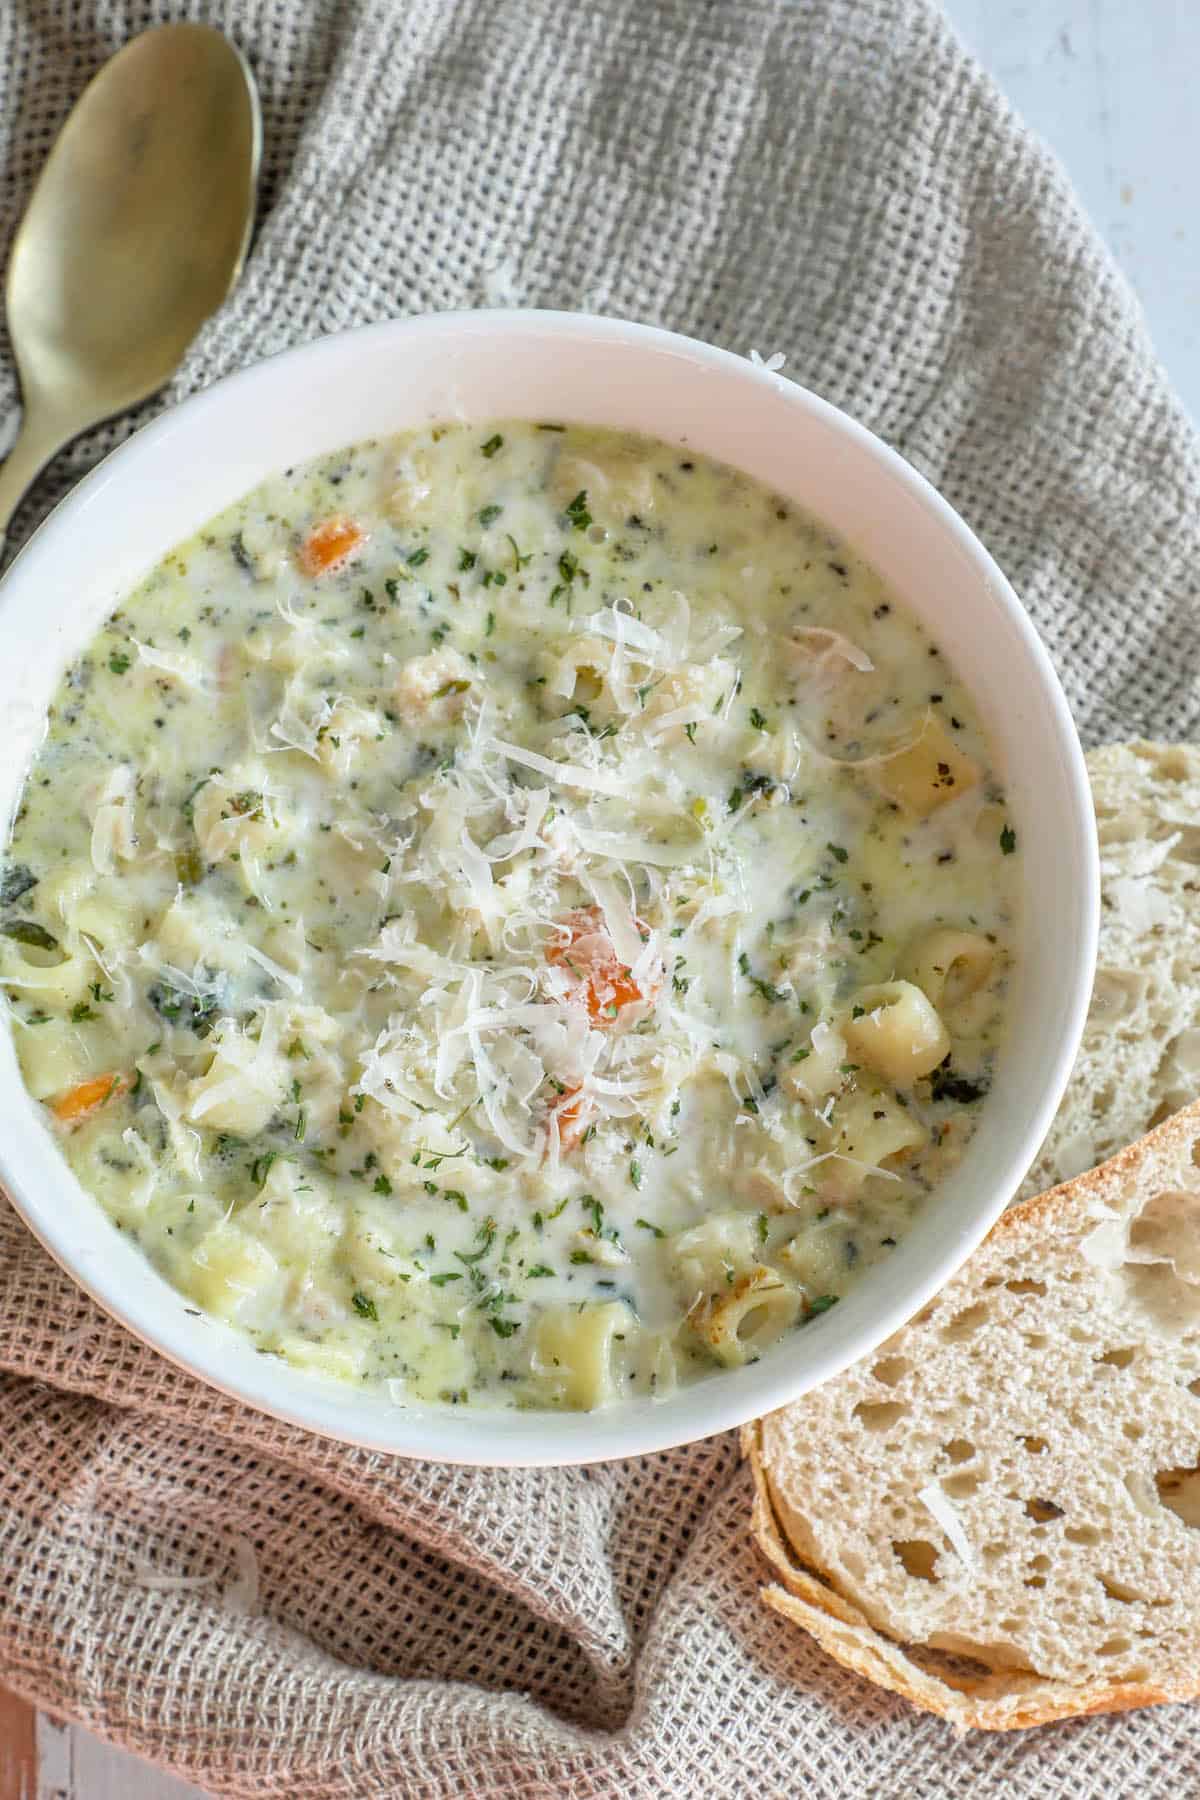 A creamy chicken noodle soup with bread next to it.